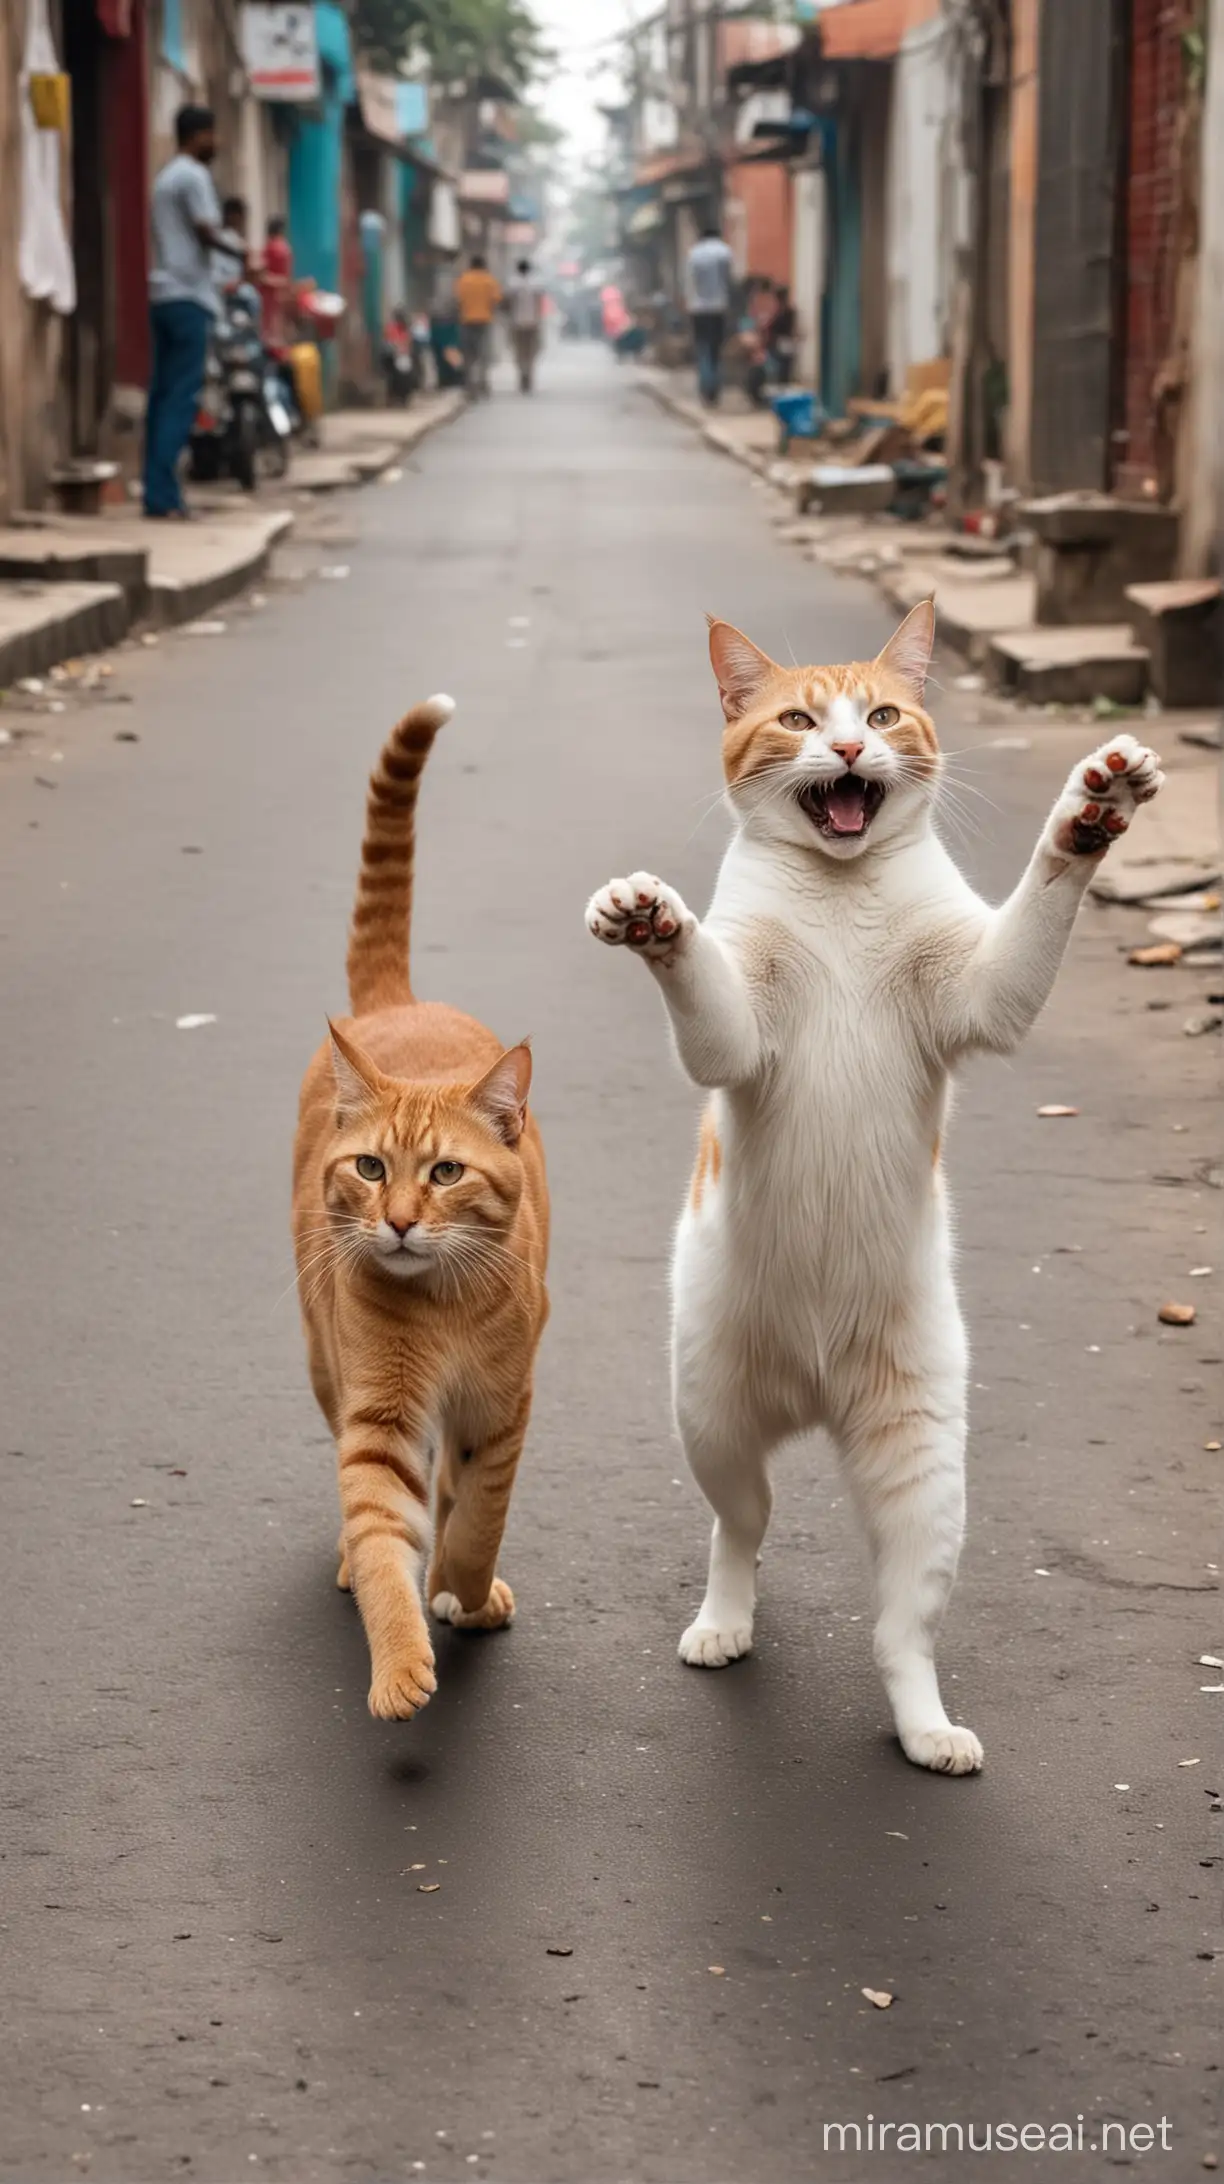 The Indian cat frolics joyfully on the street with her boyfriend, funny